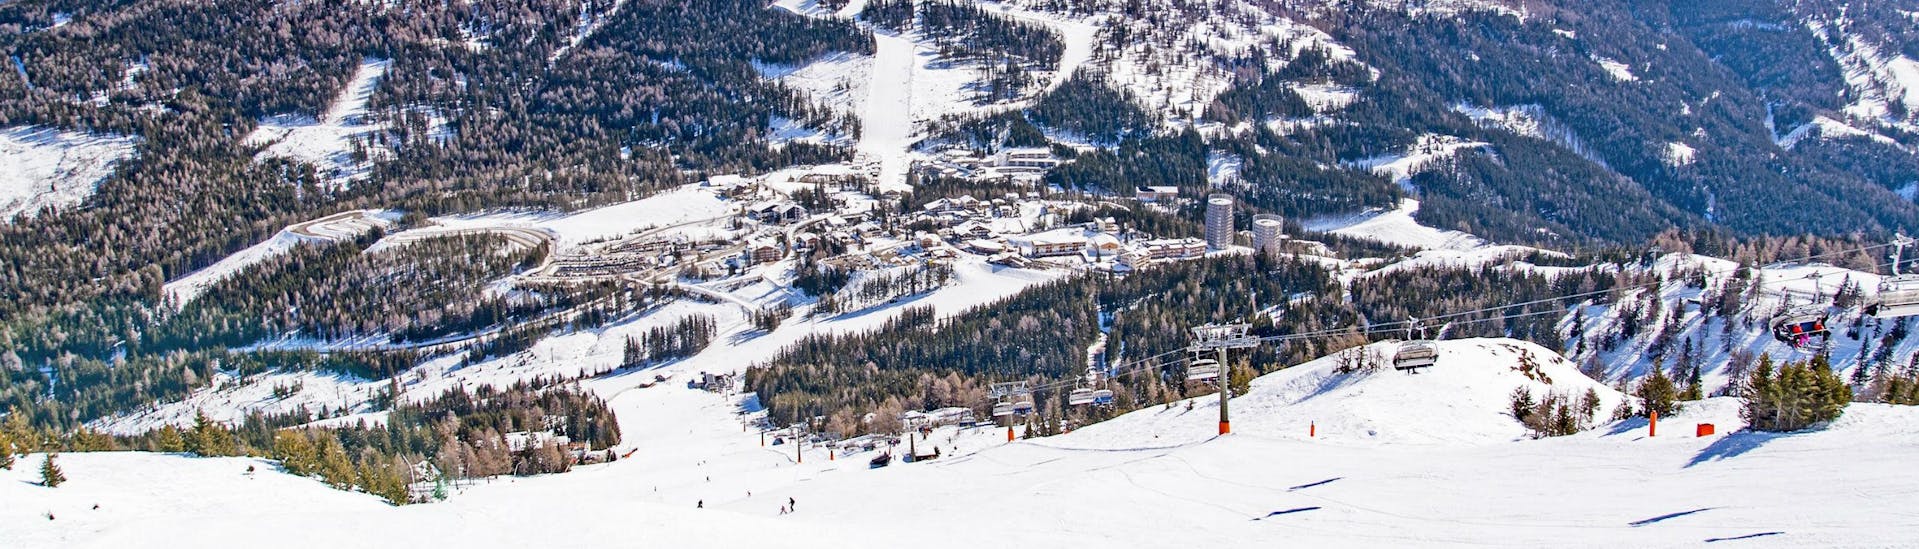 A view of the snow-covered ski slopes in the Austrian ski resort of Katschberg, where skiers can book ski lessons with one of the local ski schools.